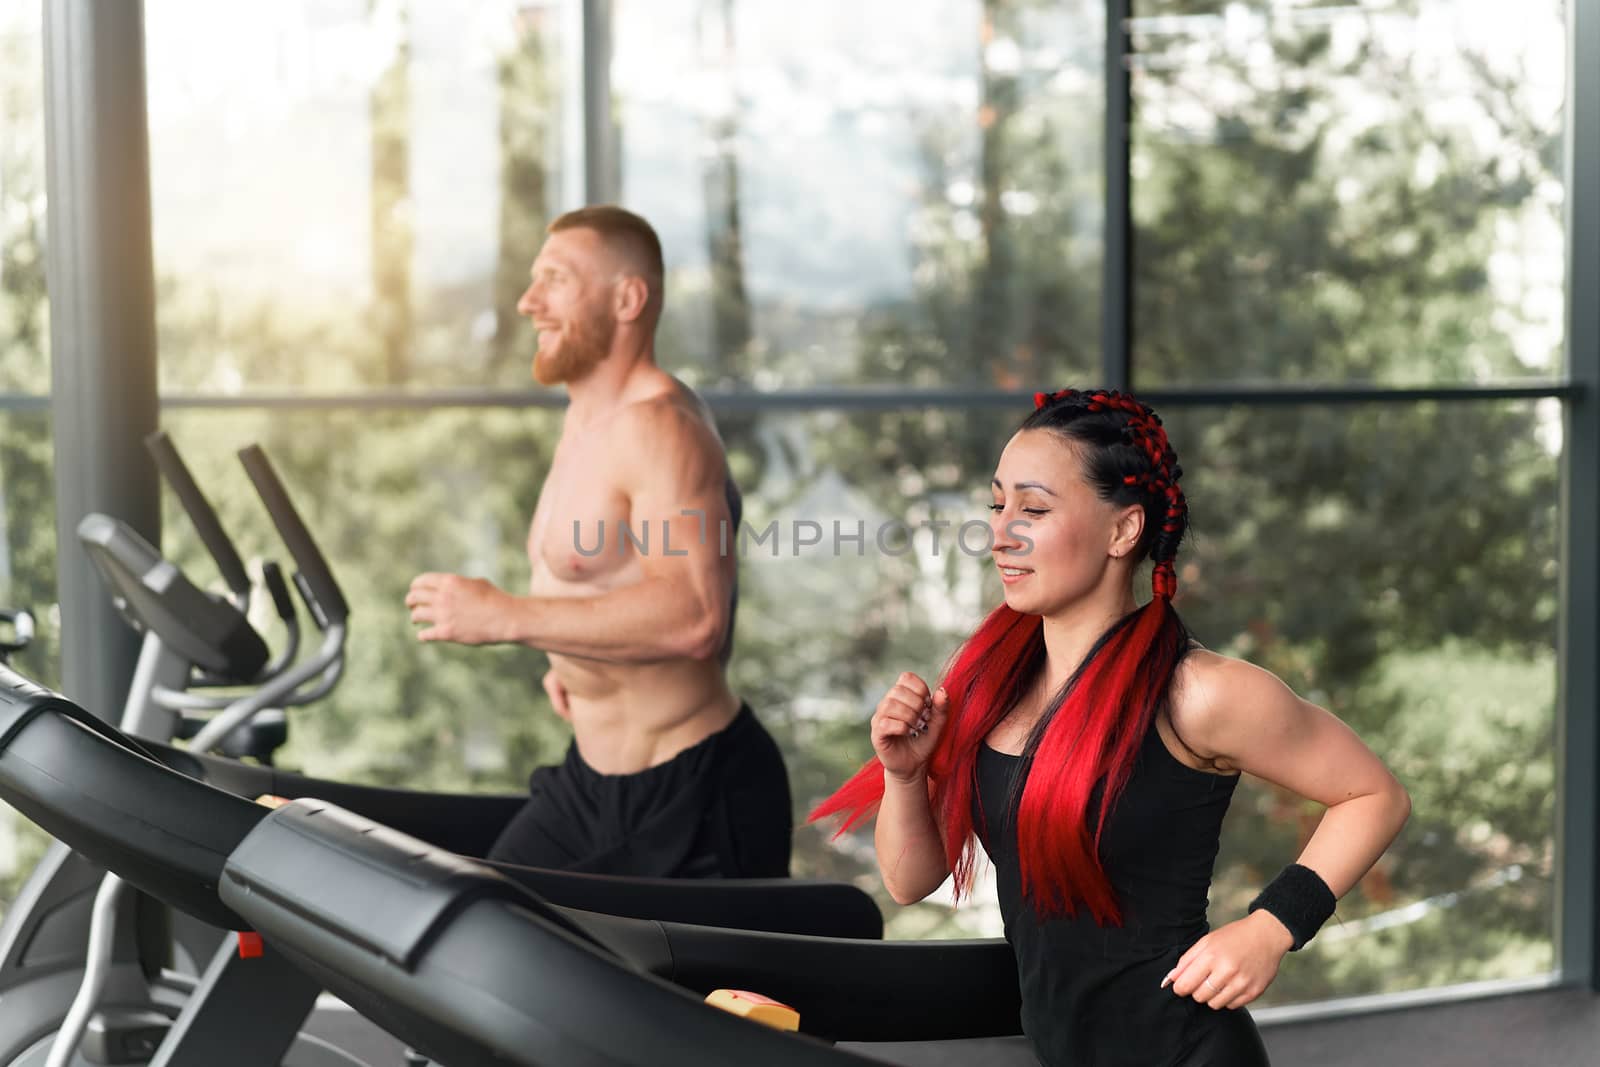 Gym treadmill running trainer man woman training together jogging fitness workout Warming up before functional cross training Personal coach train girl run on treadmil with panoramic window background